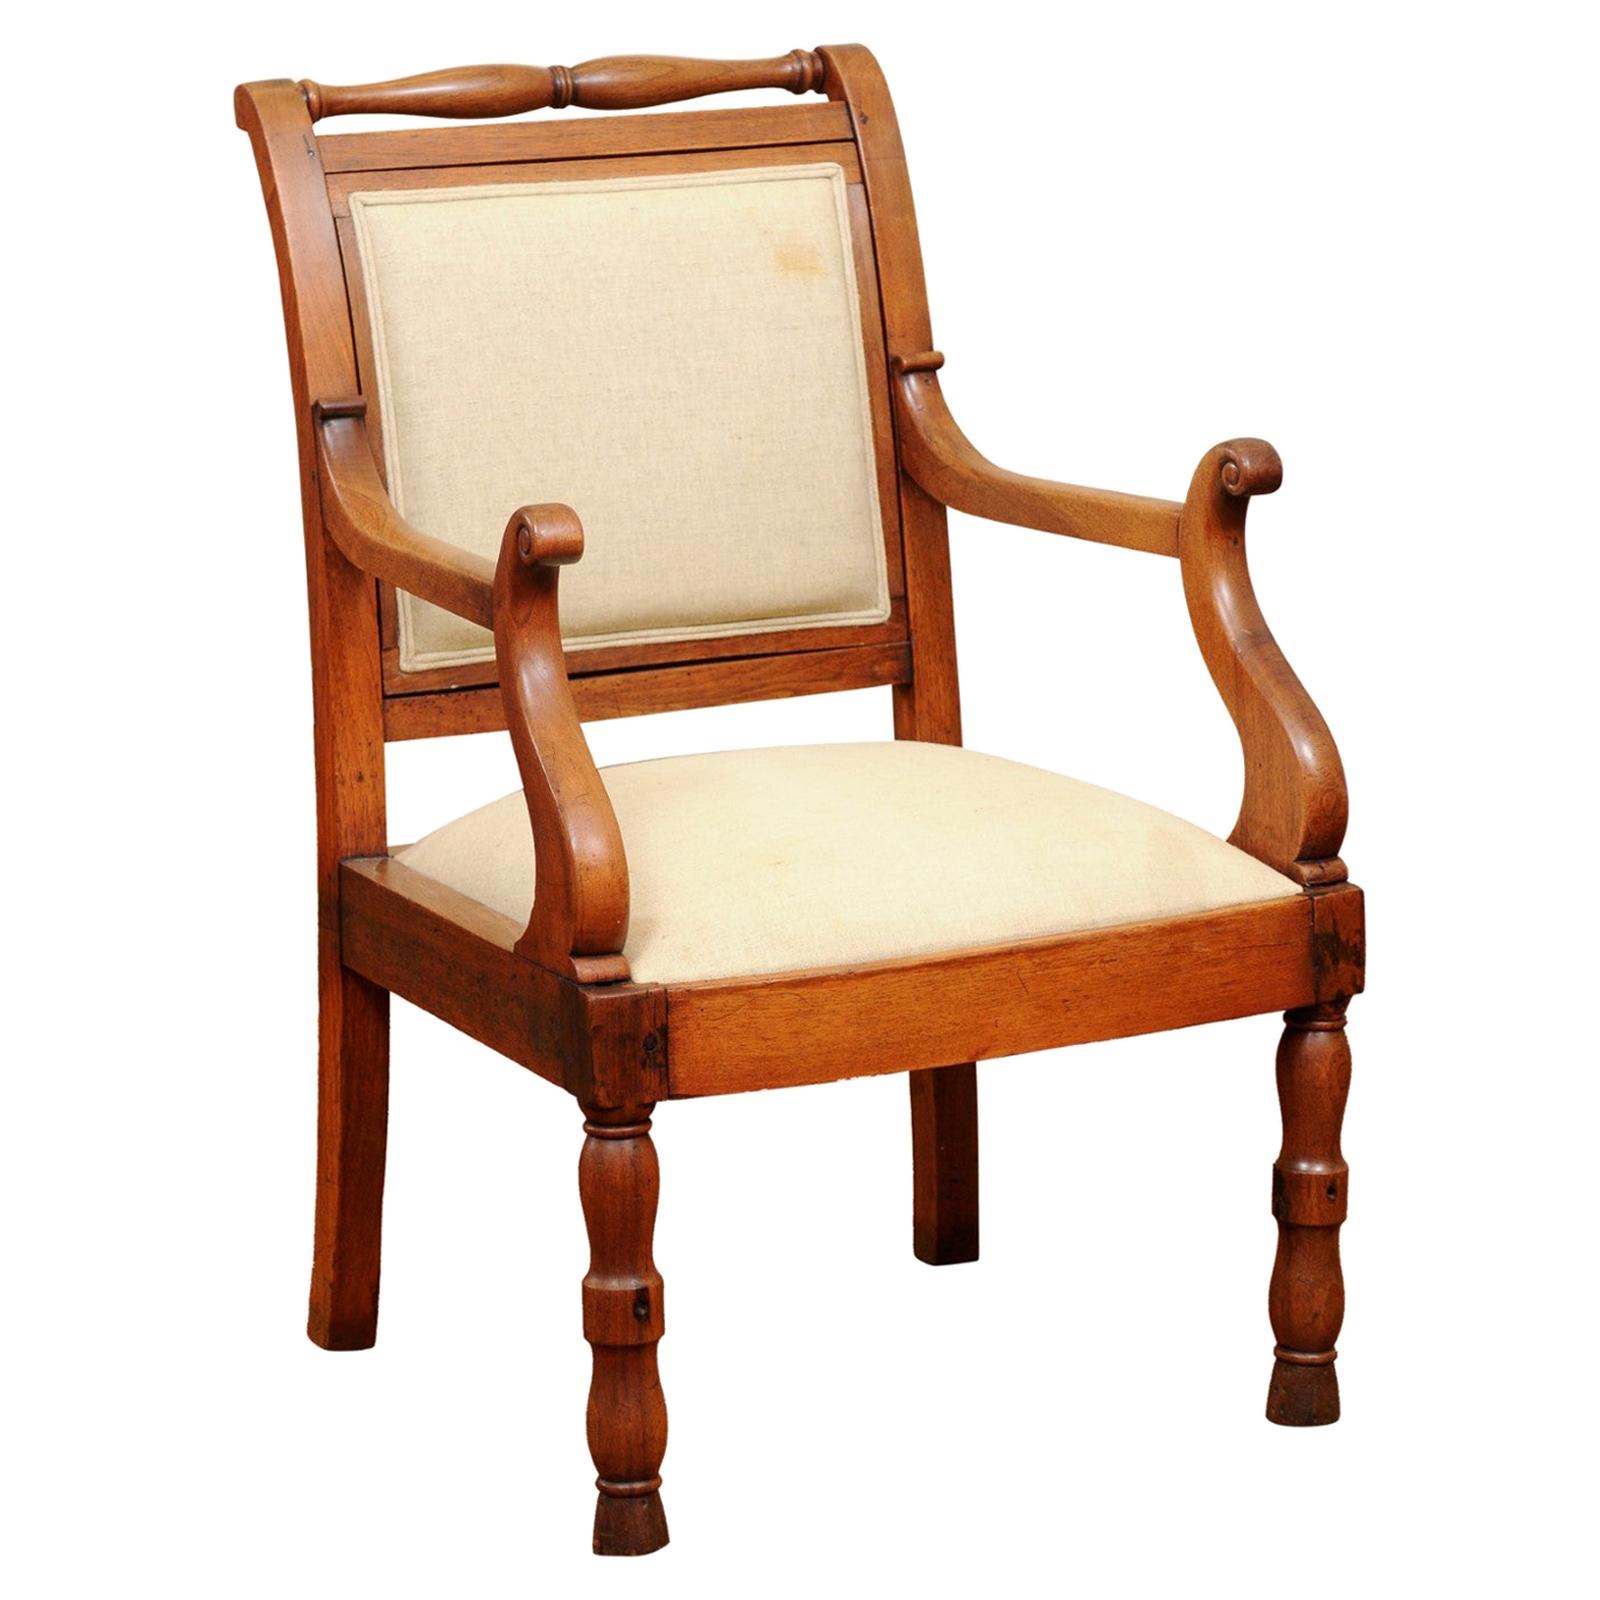 Walnut Armchair with Turned Rail & Legs and Scroll Arms, France, circa 1840